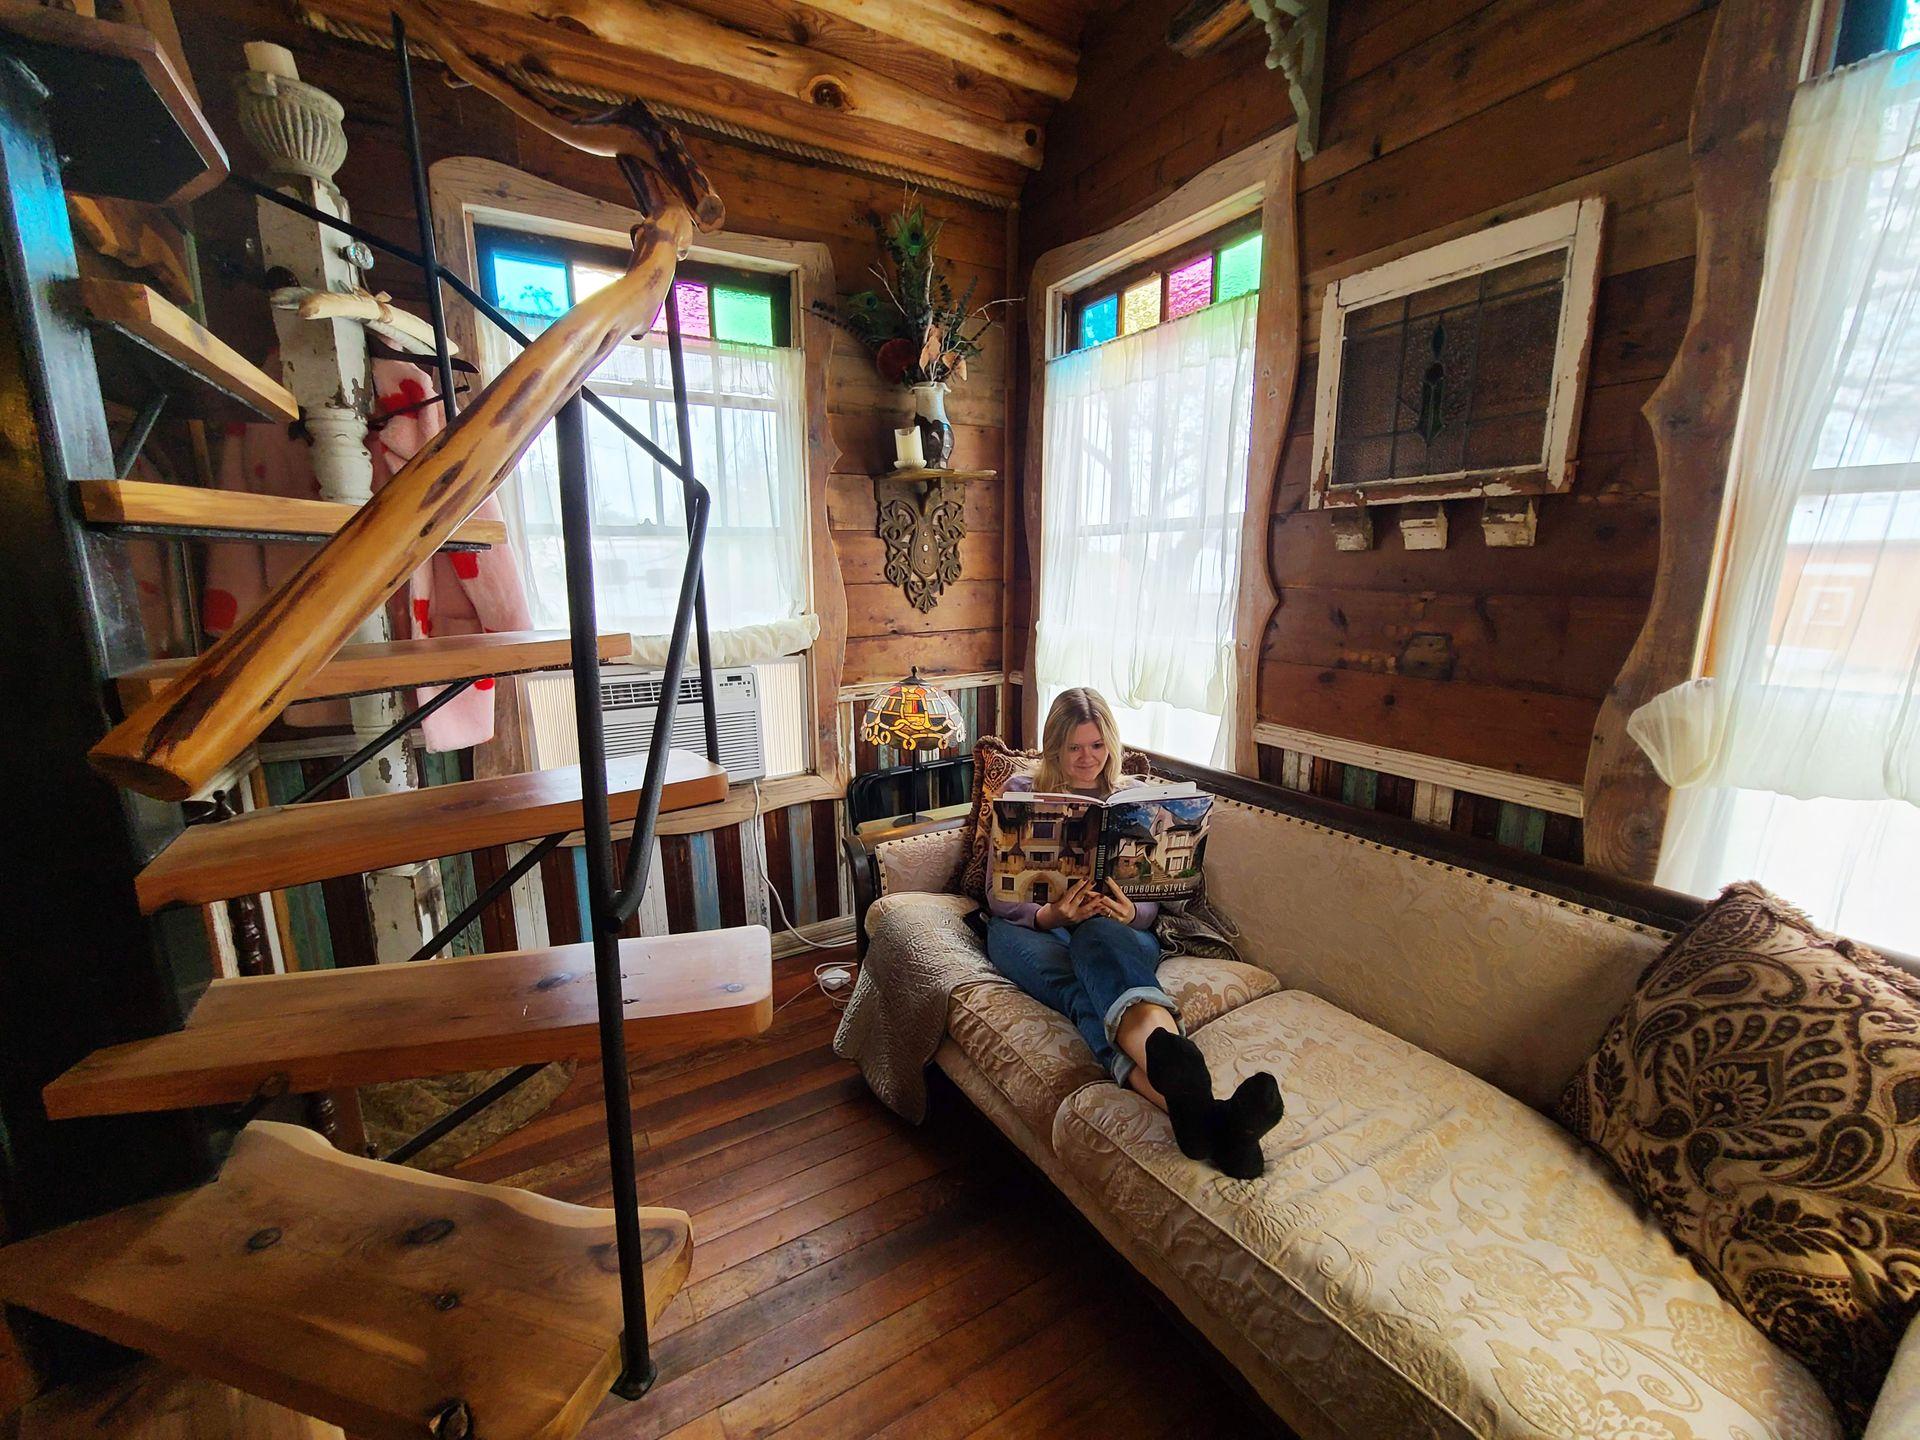 Lydia sits on a couch reading a magazine inside of a cottage with stained glass windows, a spiral staircase and vintage furniture.